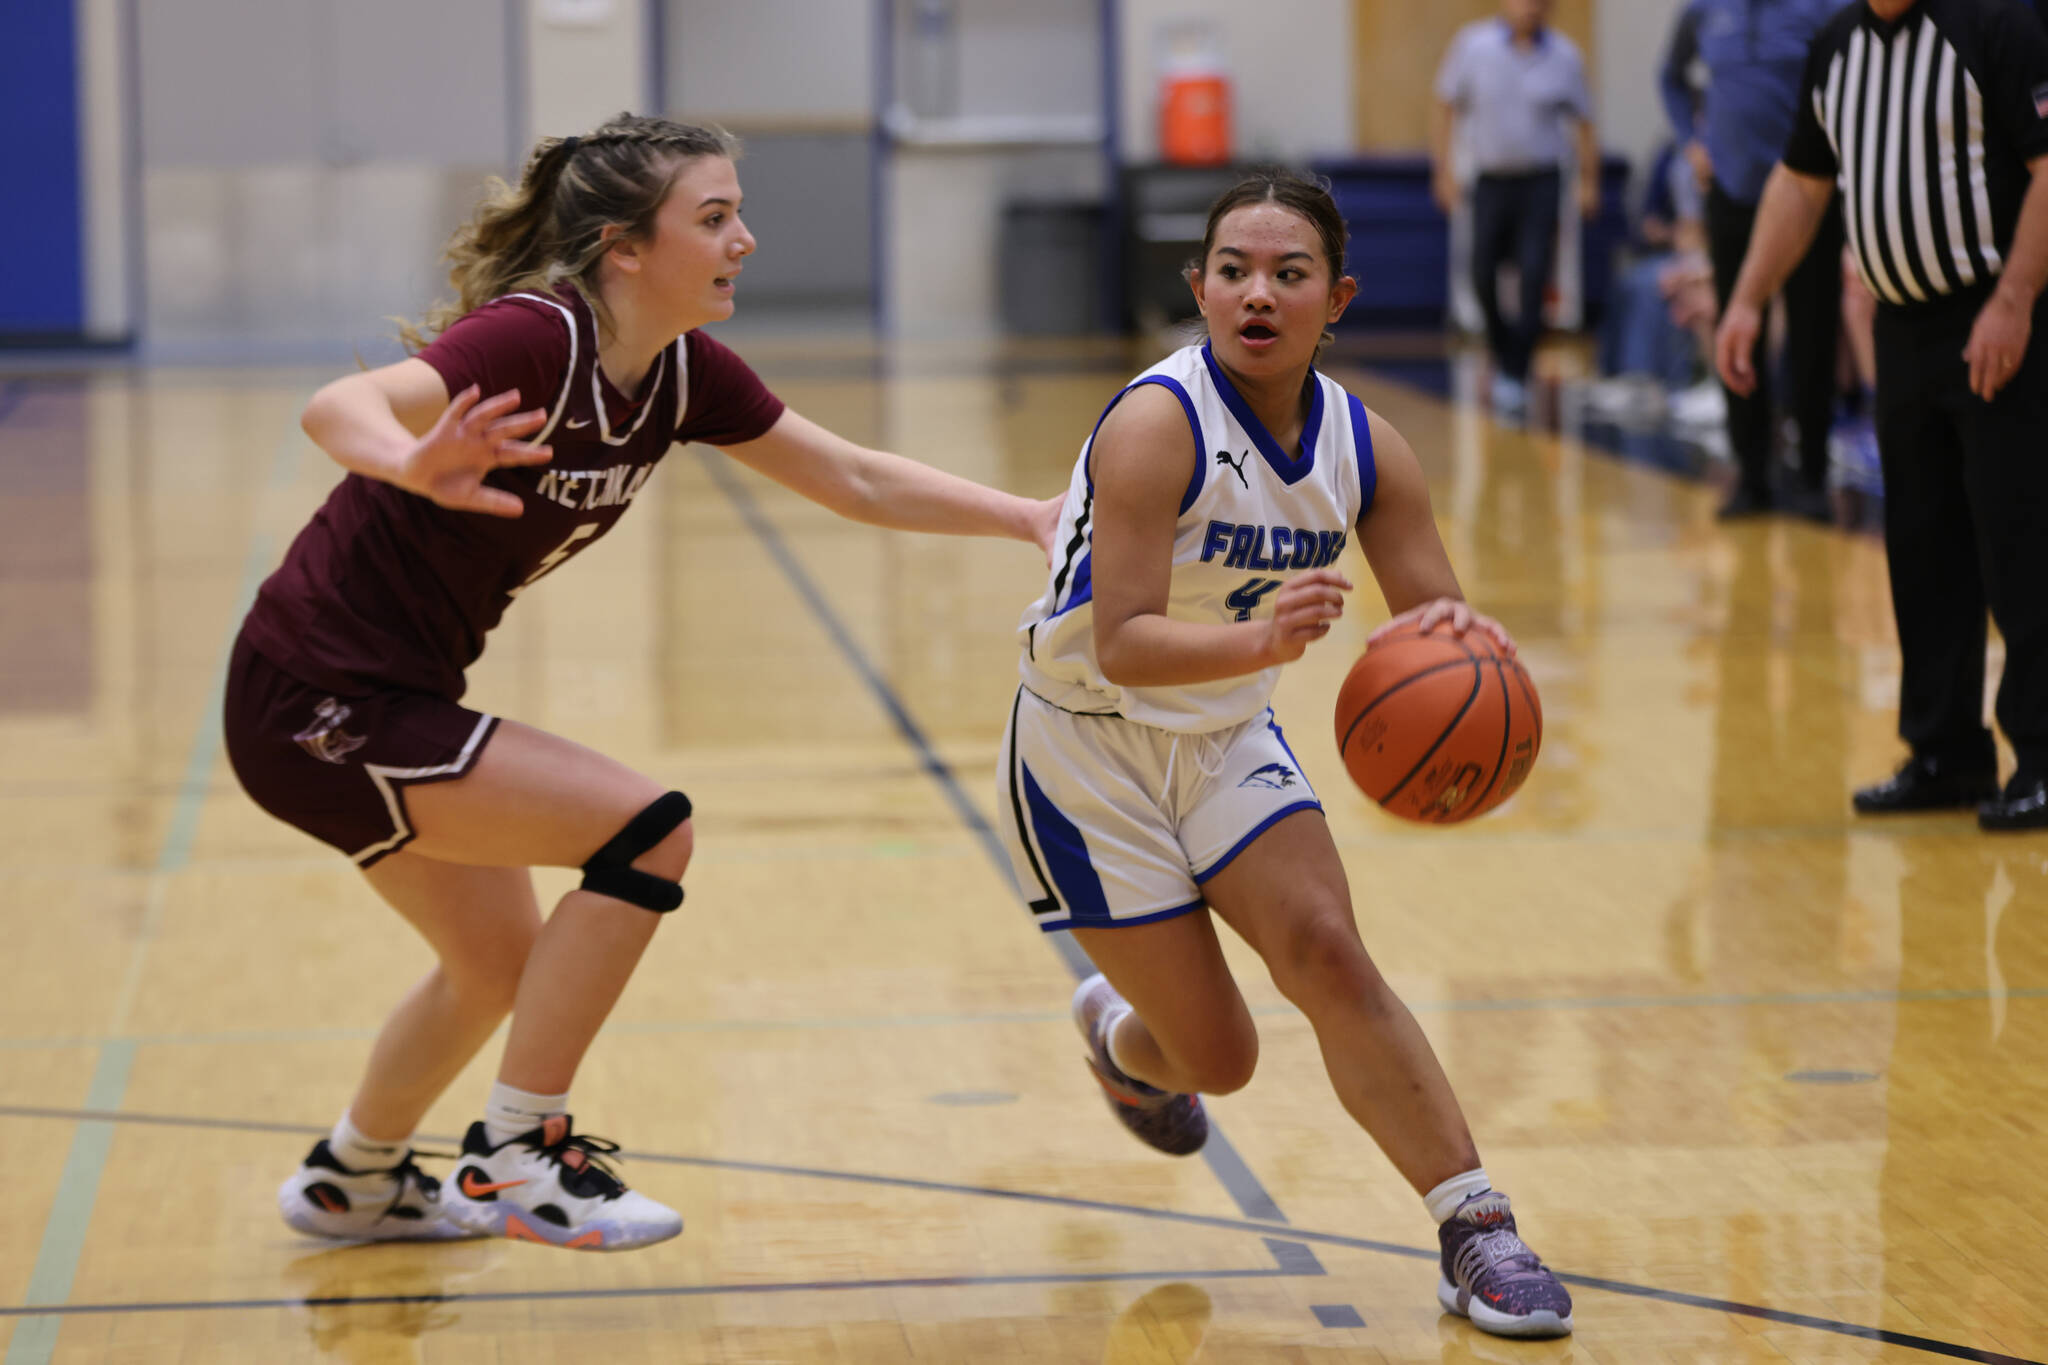 TMHS junior Mikah Carandang takes the ball down court against Ketchikan while defended by Shyla Abajian earlier this season in a conference game at home. (Ben Hohenstatt / Juneau Empire)